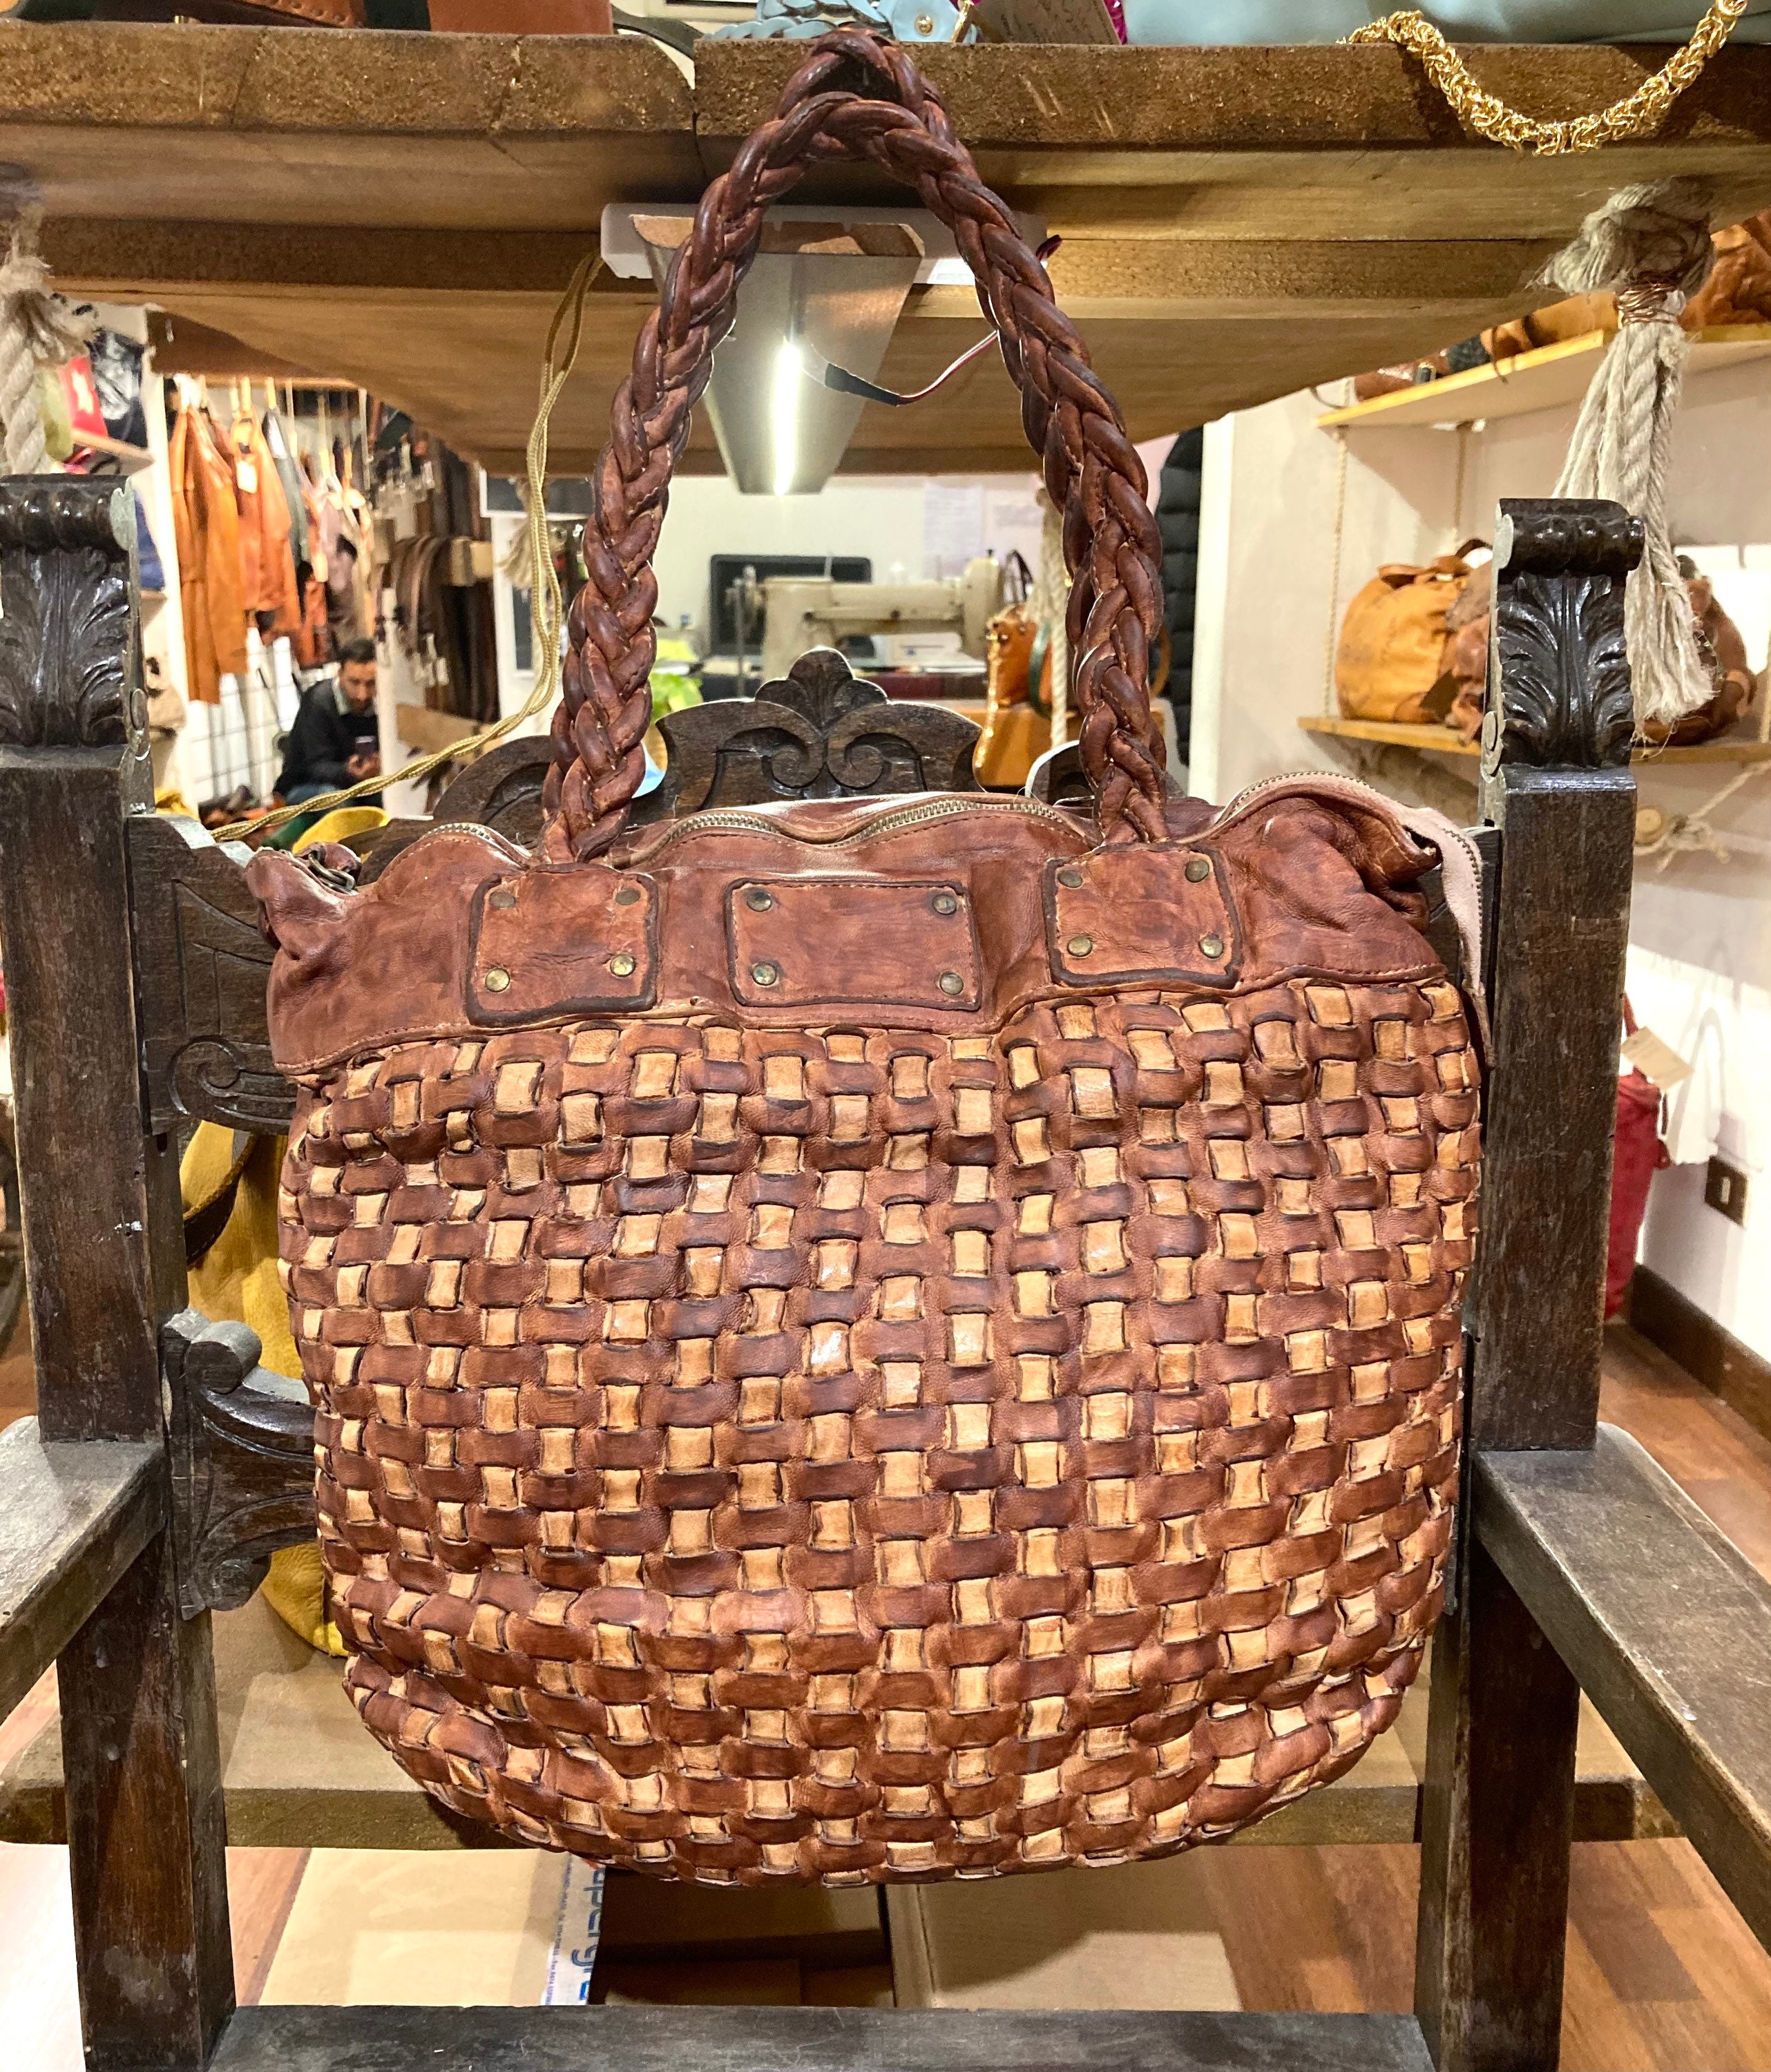 Woven leather bag. Luxury bag handmade in Italy - Nude